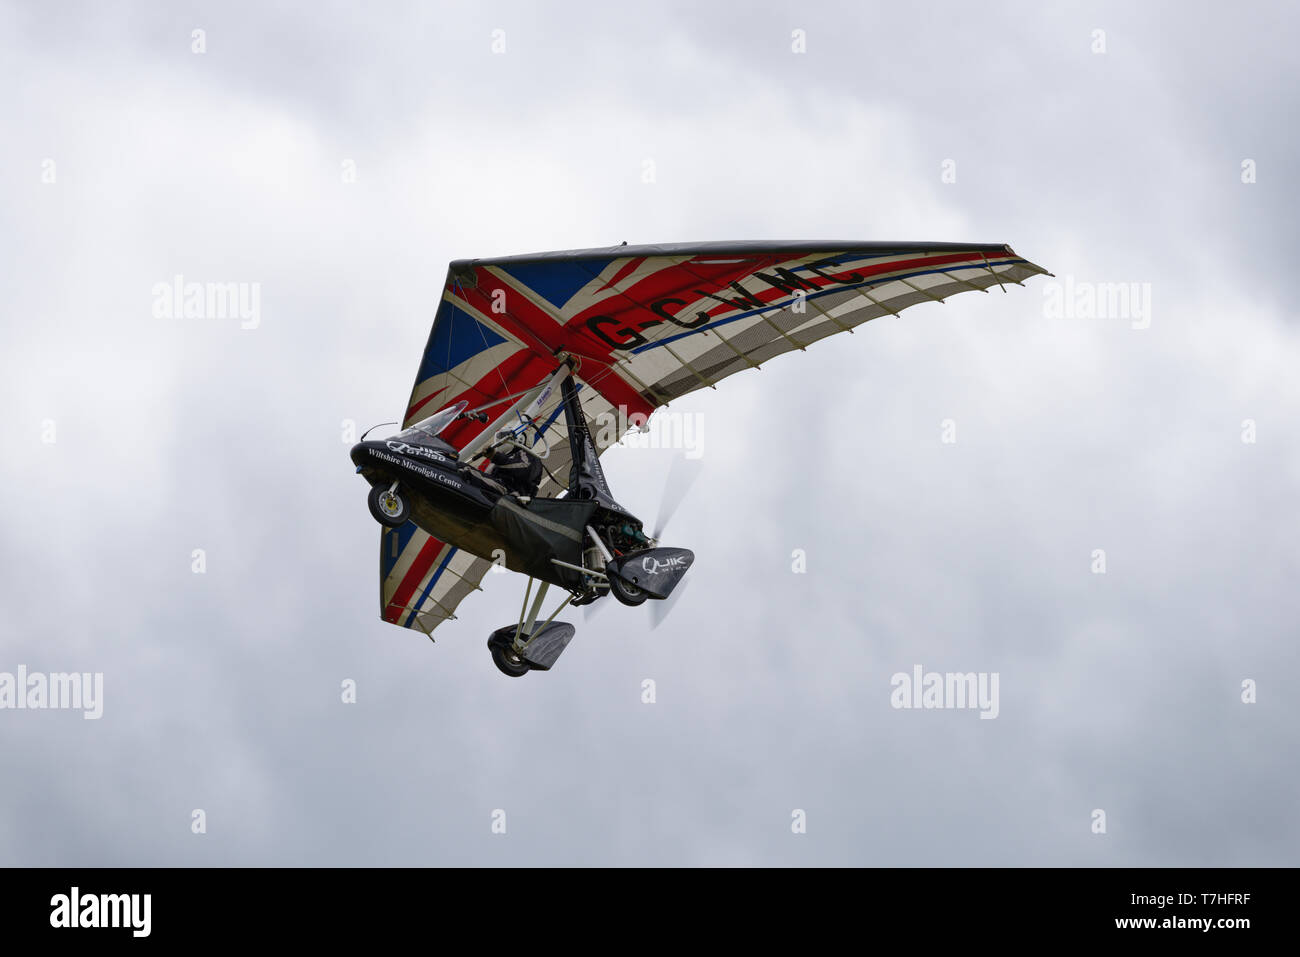 Patriotic Union Jack design on the wing of this Quik GT450 flex wing microlight as it flies abovce Popham Airfield in Hampshire Stock Photo